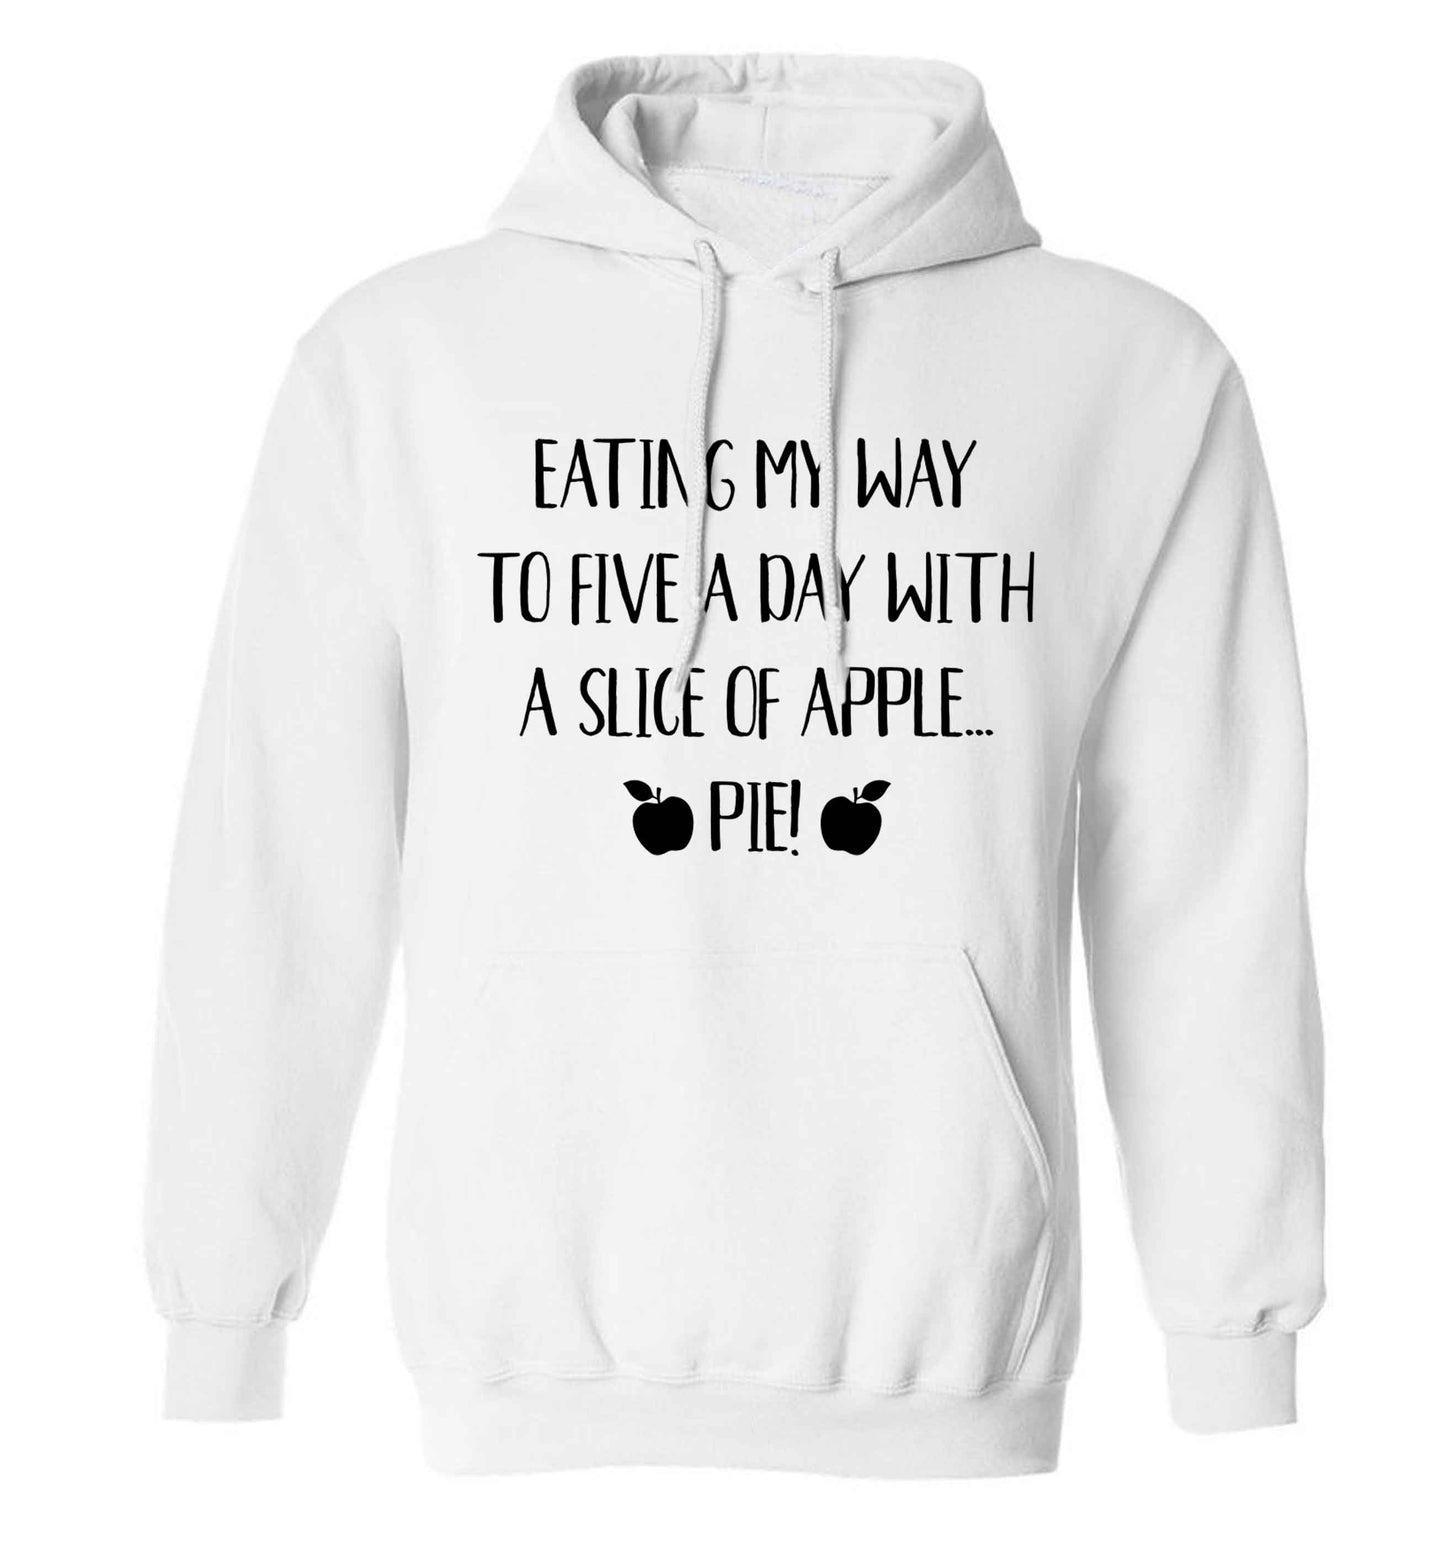 Eating my way to five a day with a slice of apple pie adults unisex white hoodie 2XL